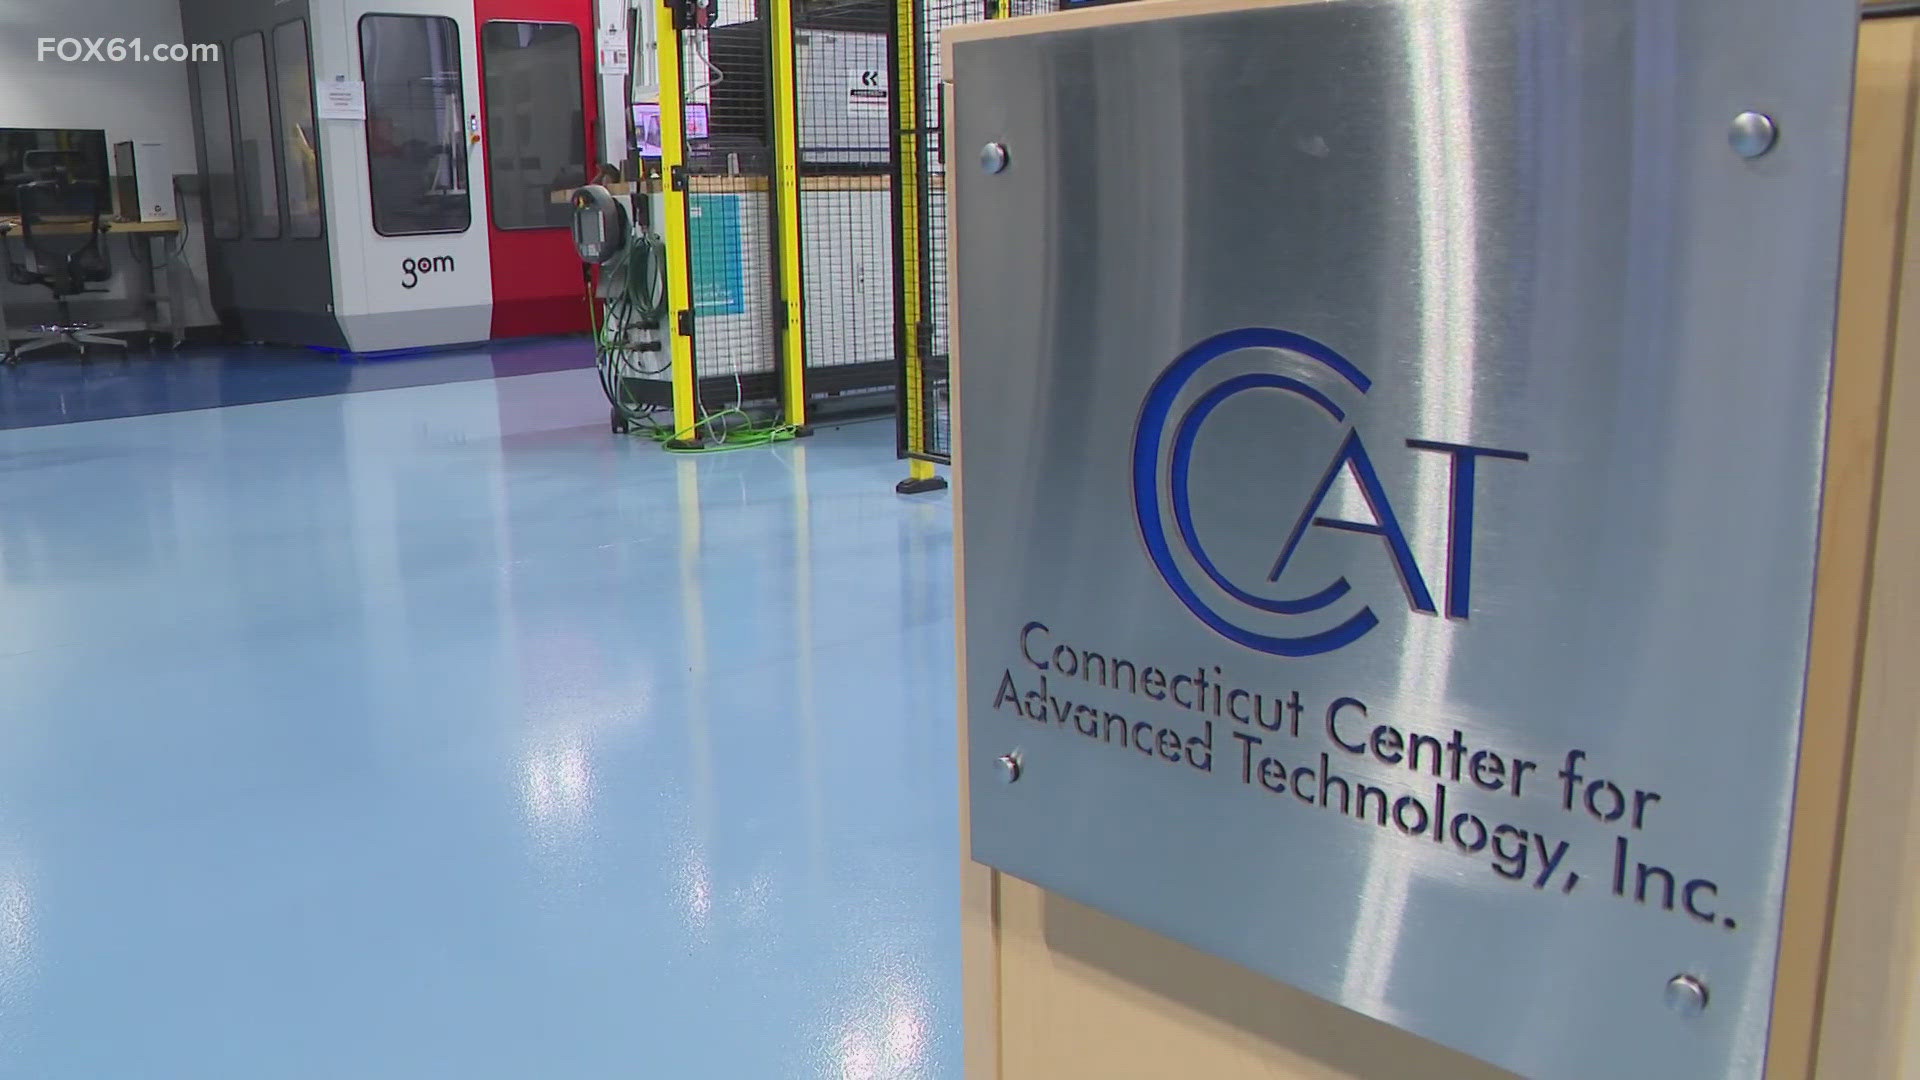 The mission of the Connecticut Center for Advanced Technology is to help companies with their manufacturing strategies. Their labs are filled with cutting edge tech.